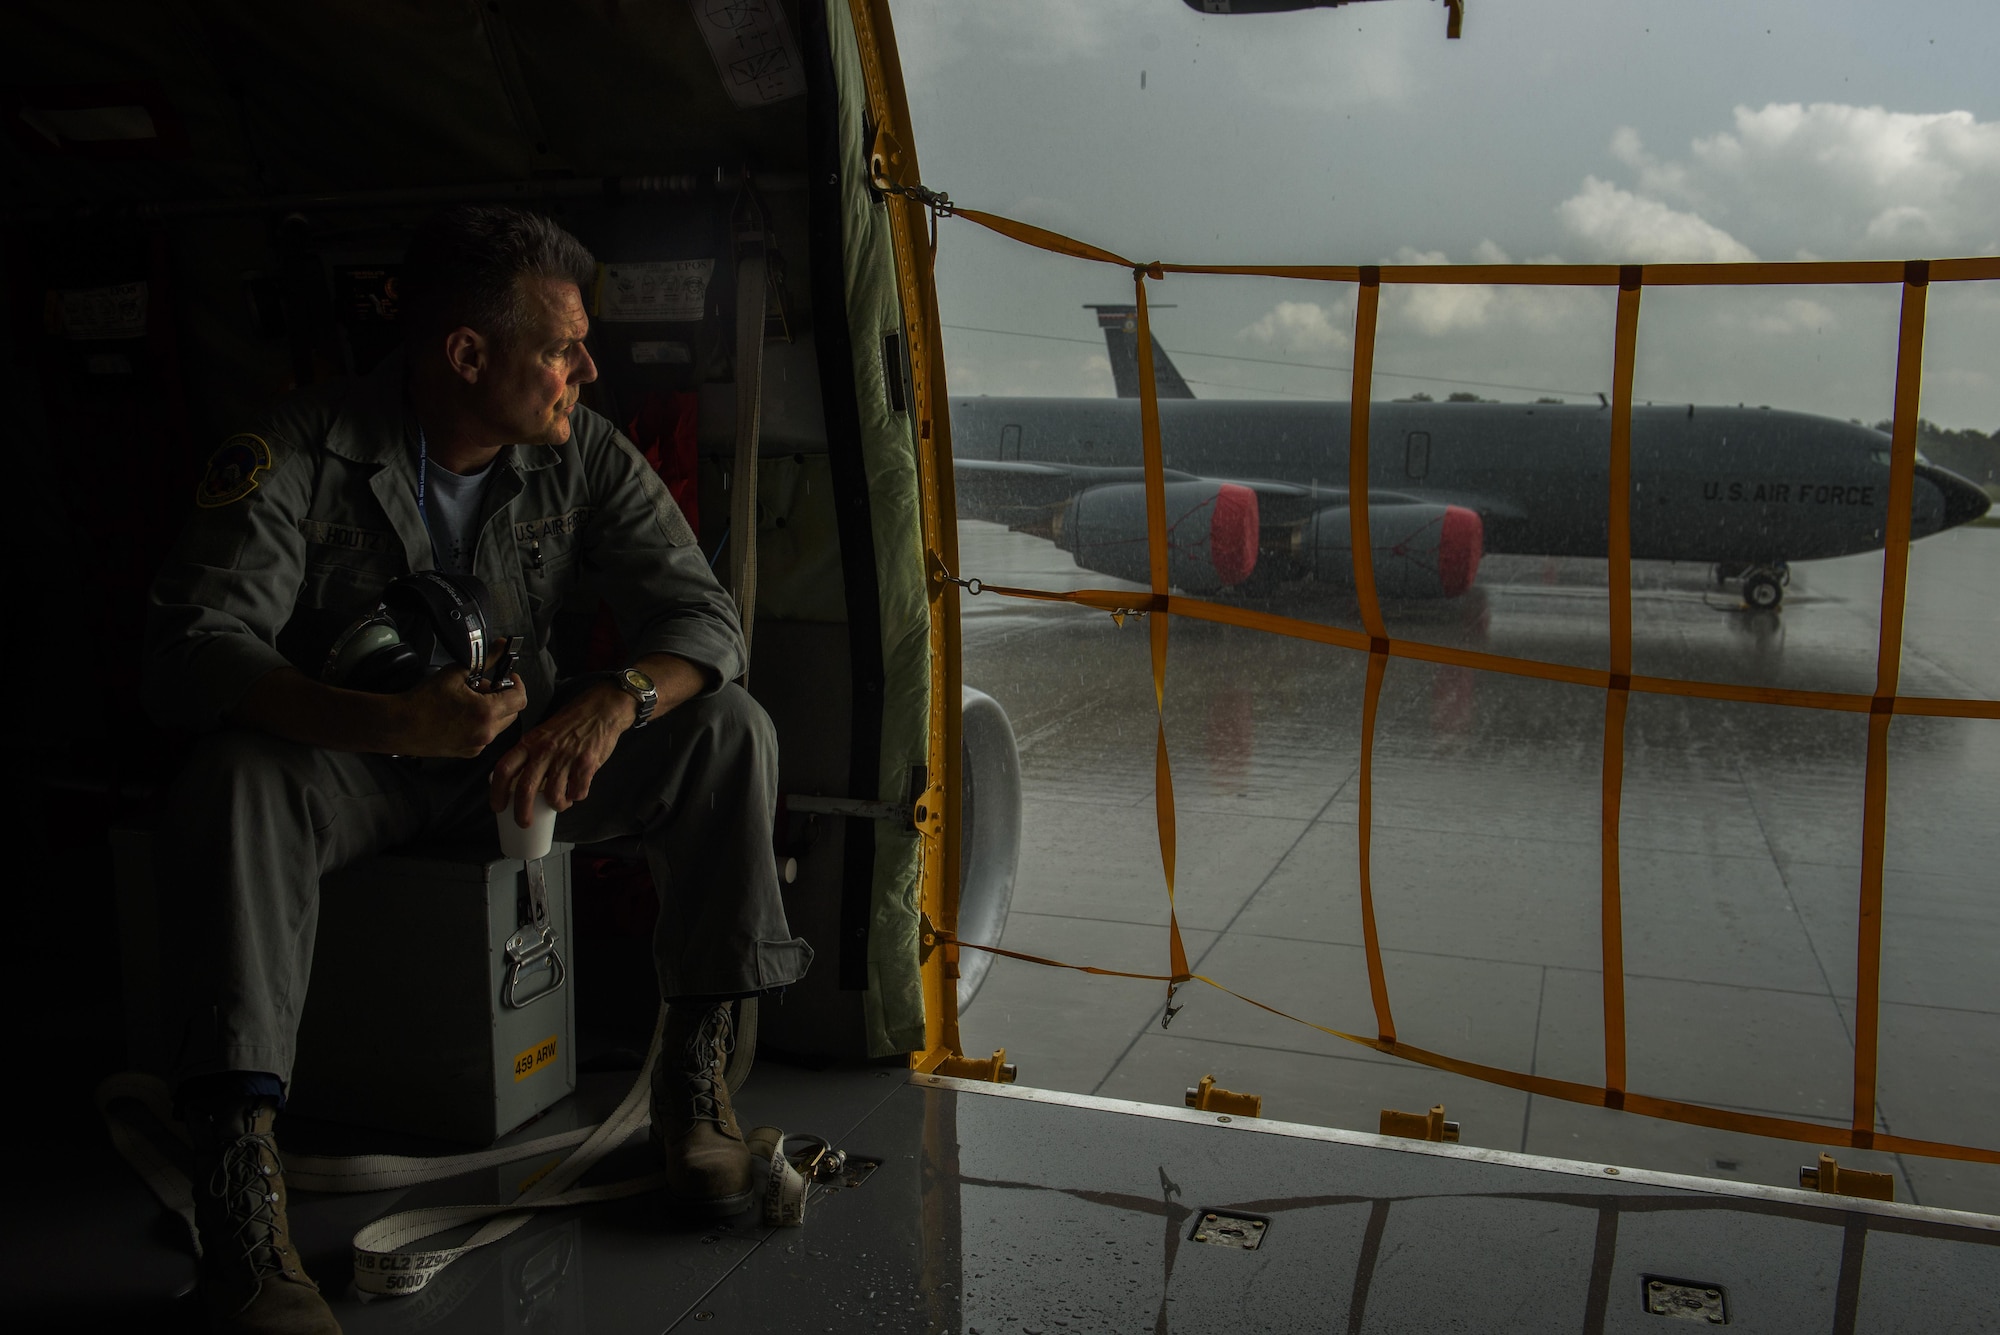 Master Sgt. John Houtz, 459th Aircraft Maintenance Squadron flightline hydraulics, is part of the Total Force Citizen Airmen team waits until the rain stops on a KC-135R Stratotanker during BALTOPS exercise at Powidz Air Base,
Poland, June 12, 2017. The exercise is designed to enhance flexibility and interoperability, to strengthen combined response capabilities, as well as demonstrate resolve among Allied and Partner Nations' forces to ensure stability in, and if necessary defend, the Baltic Sea region. (U.S. Air Force photo by Staff Sgt. Jonathan Snyder)